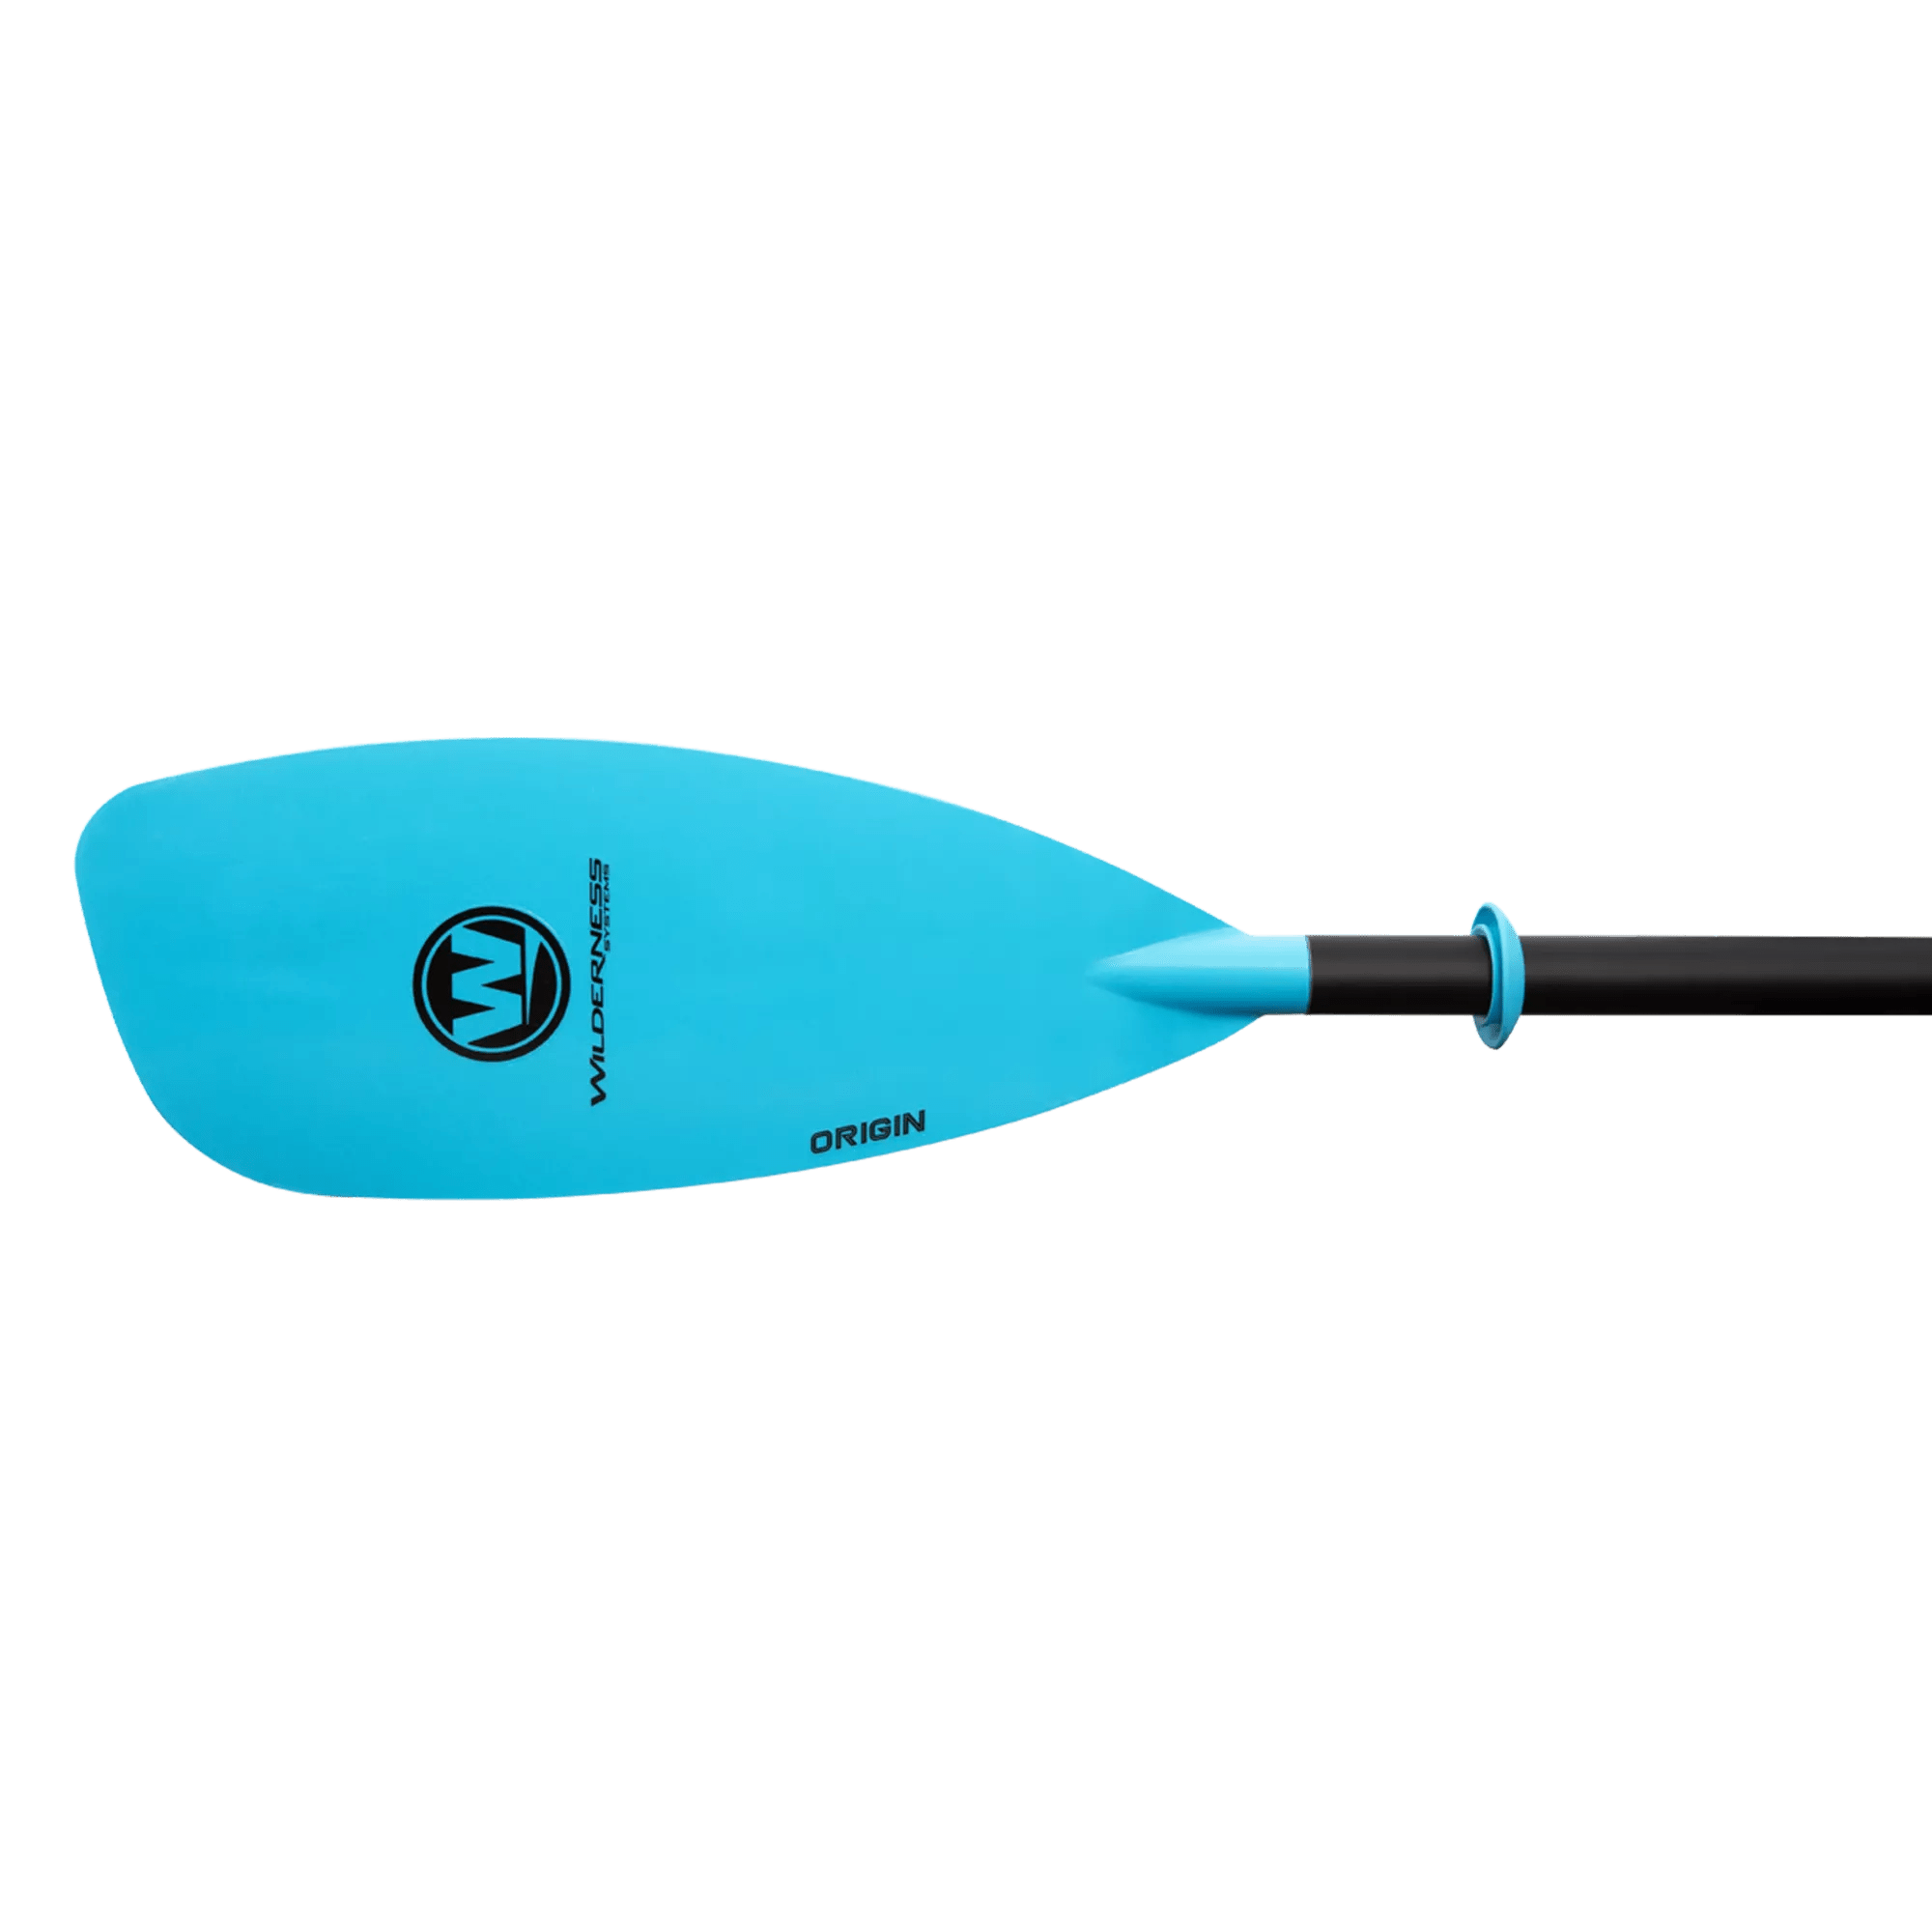 WILDERNESS SYSTEMS - Origin Glass Touring Paddle 205-225 cm - Blue - 8070225 - TOP